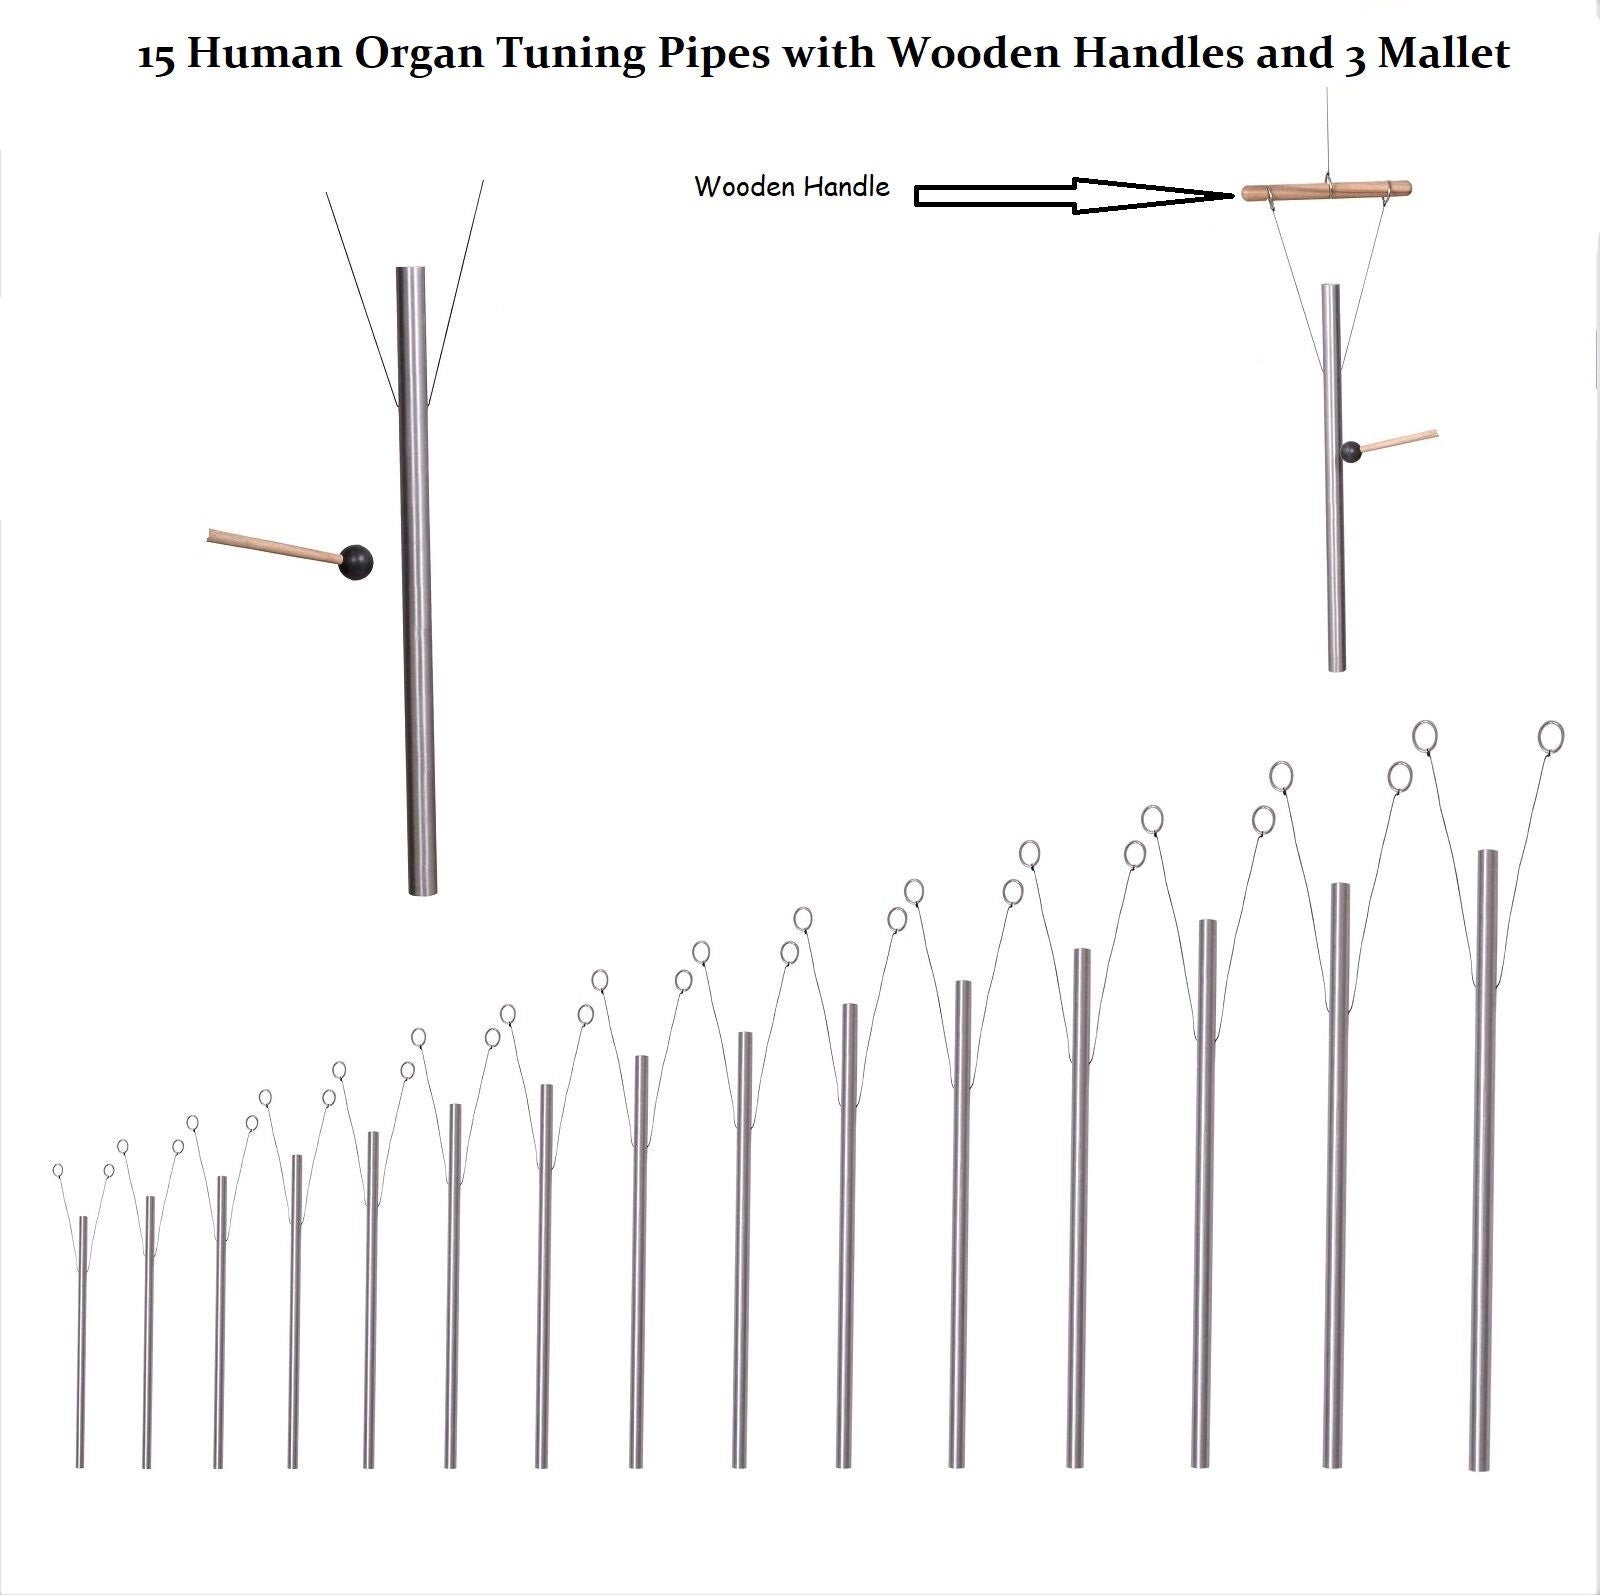 15 Human Organ Healing Tuning Pipes with Wood Hand Stands and 3 Mallets - Louder than Tuning Forks - soundhealers